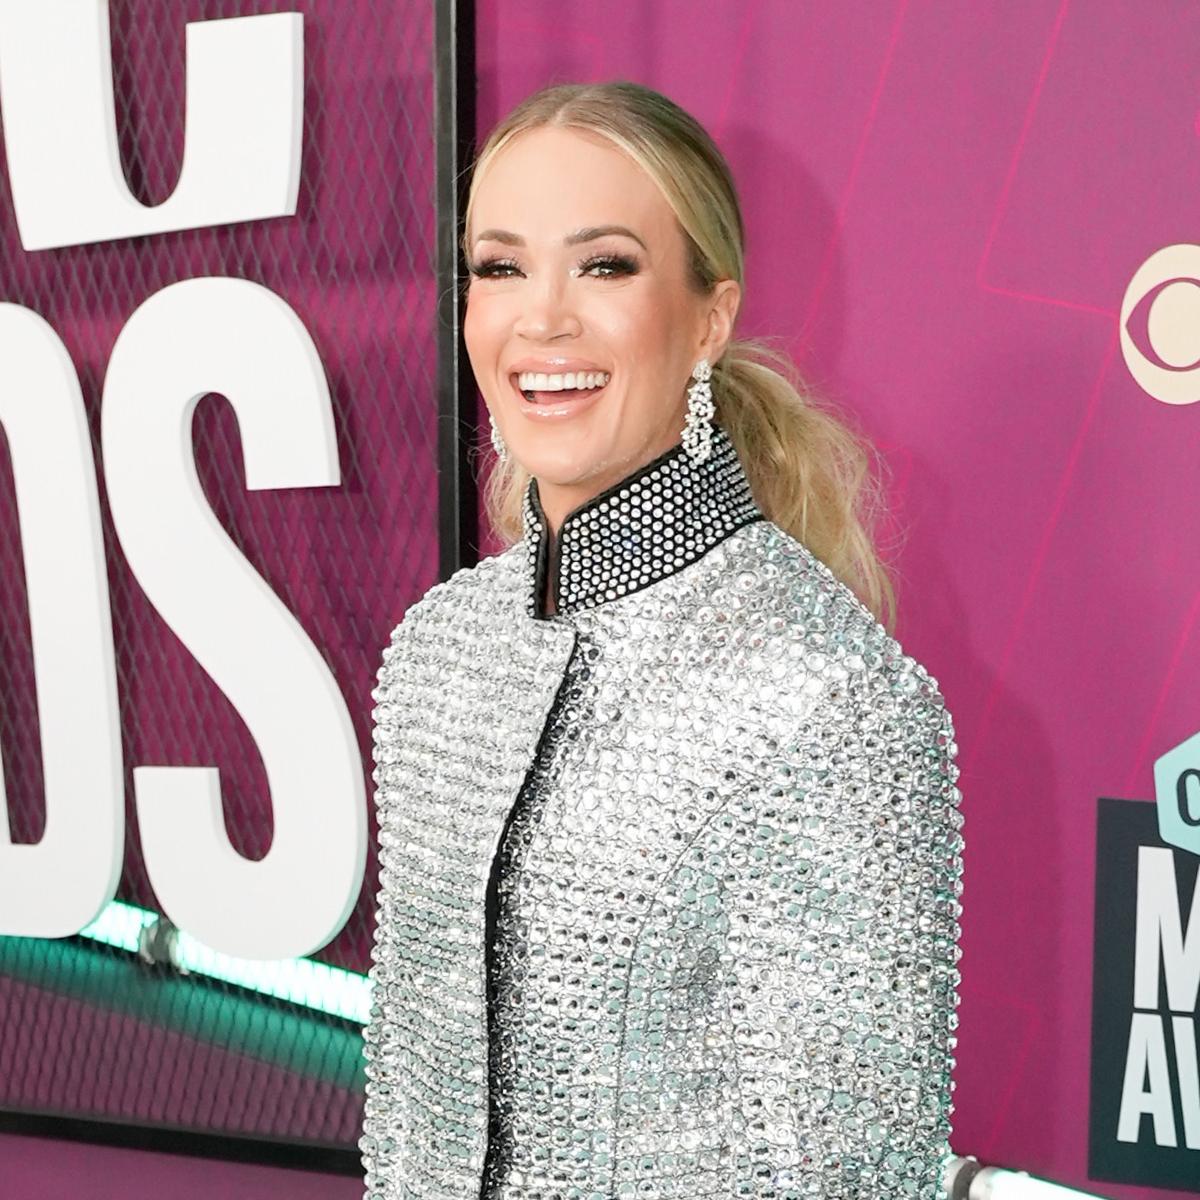 Carrie Underwood Stuns on the 2022 ACM Awards' Red Carpet in Mini Dress